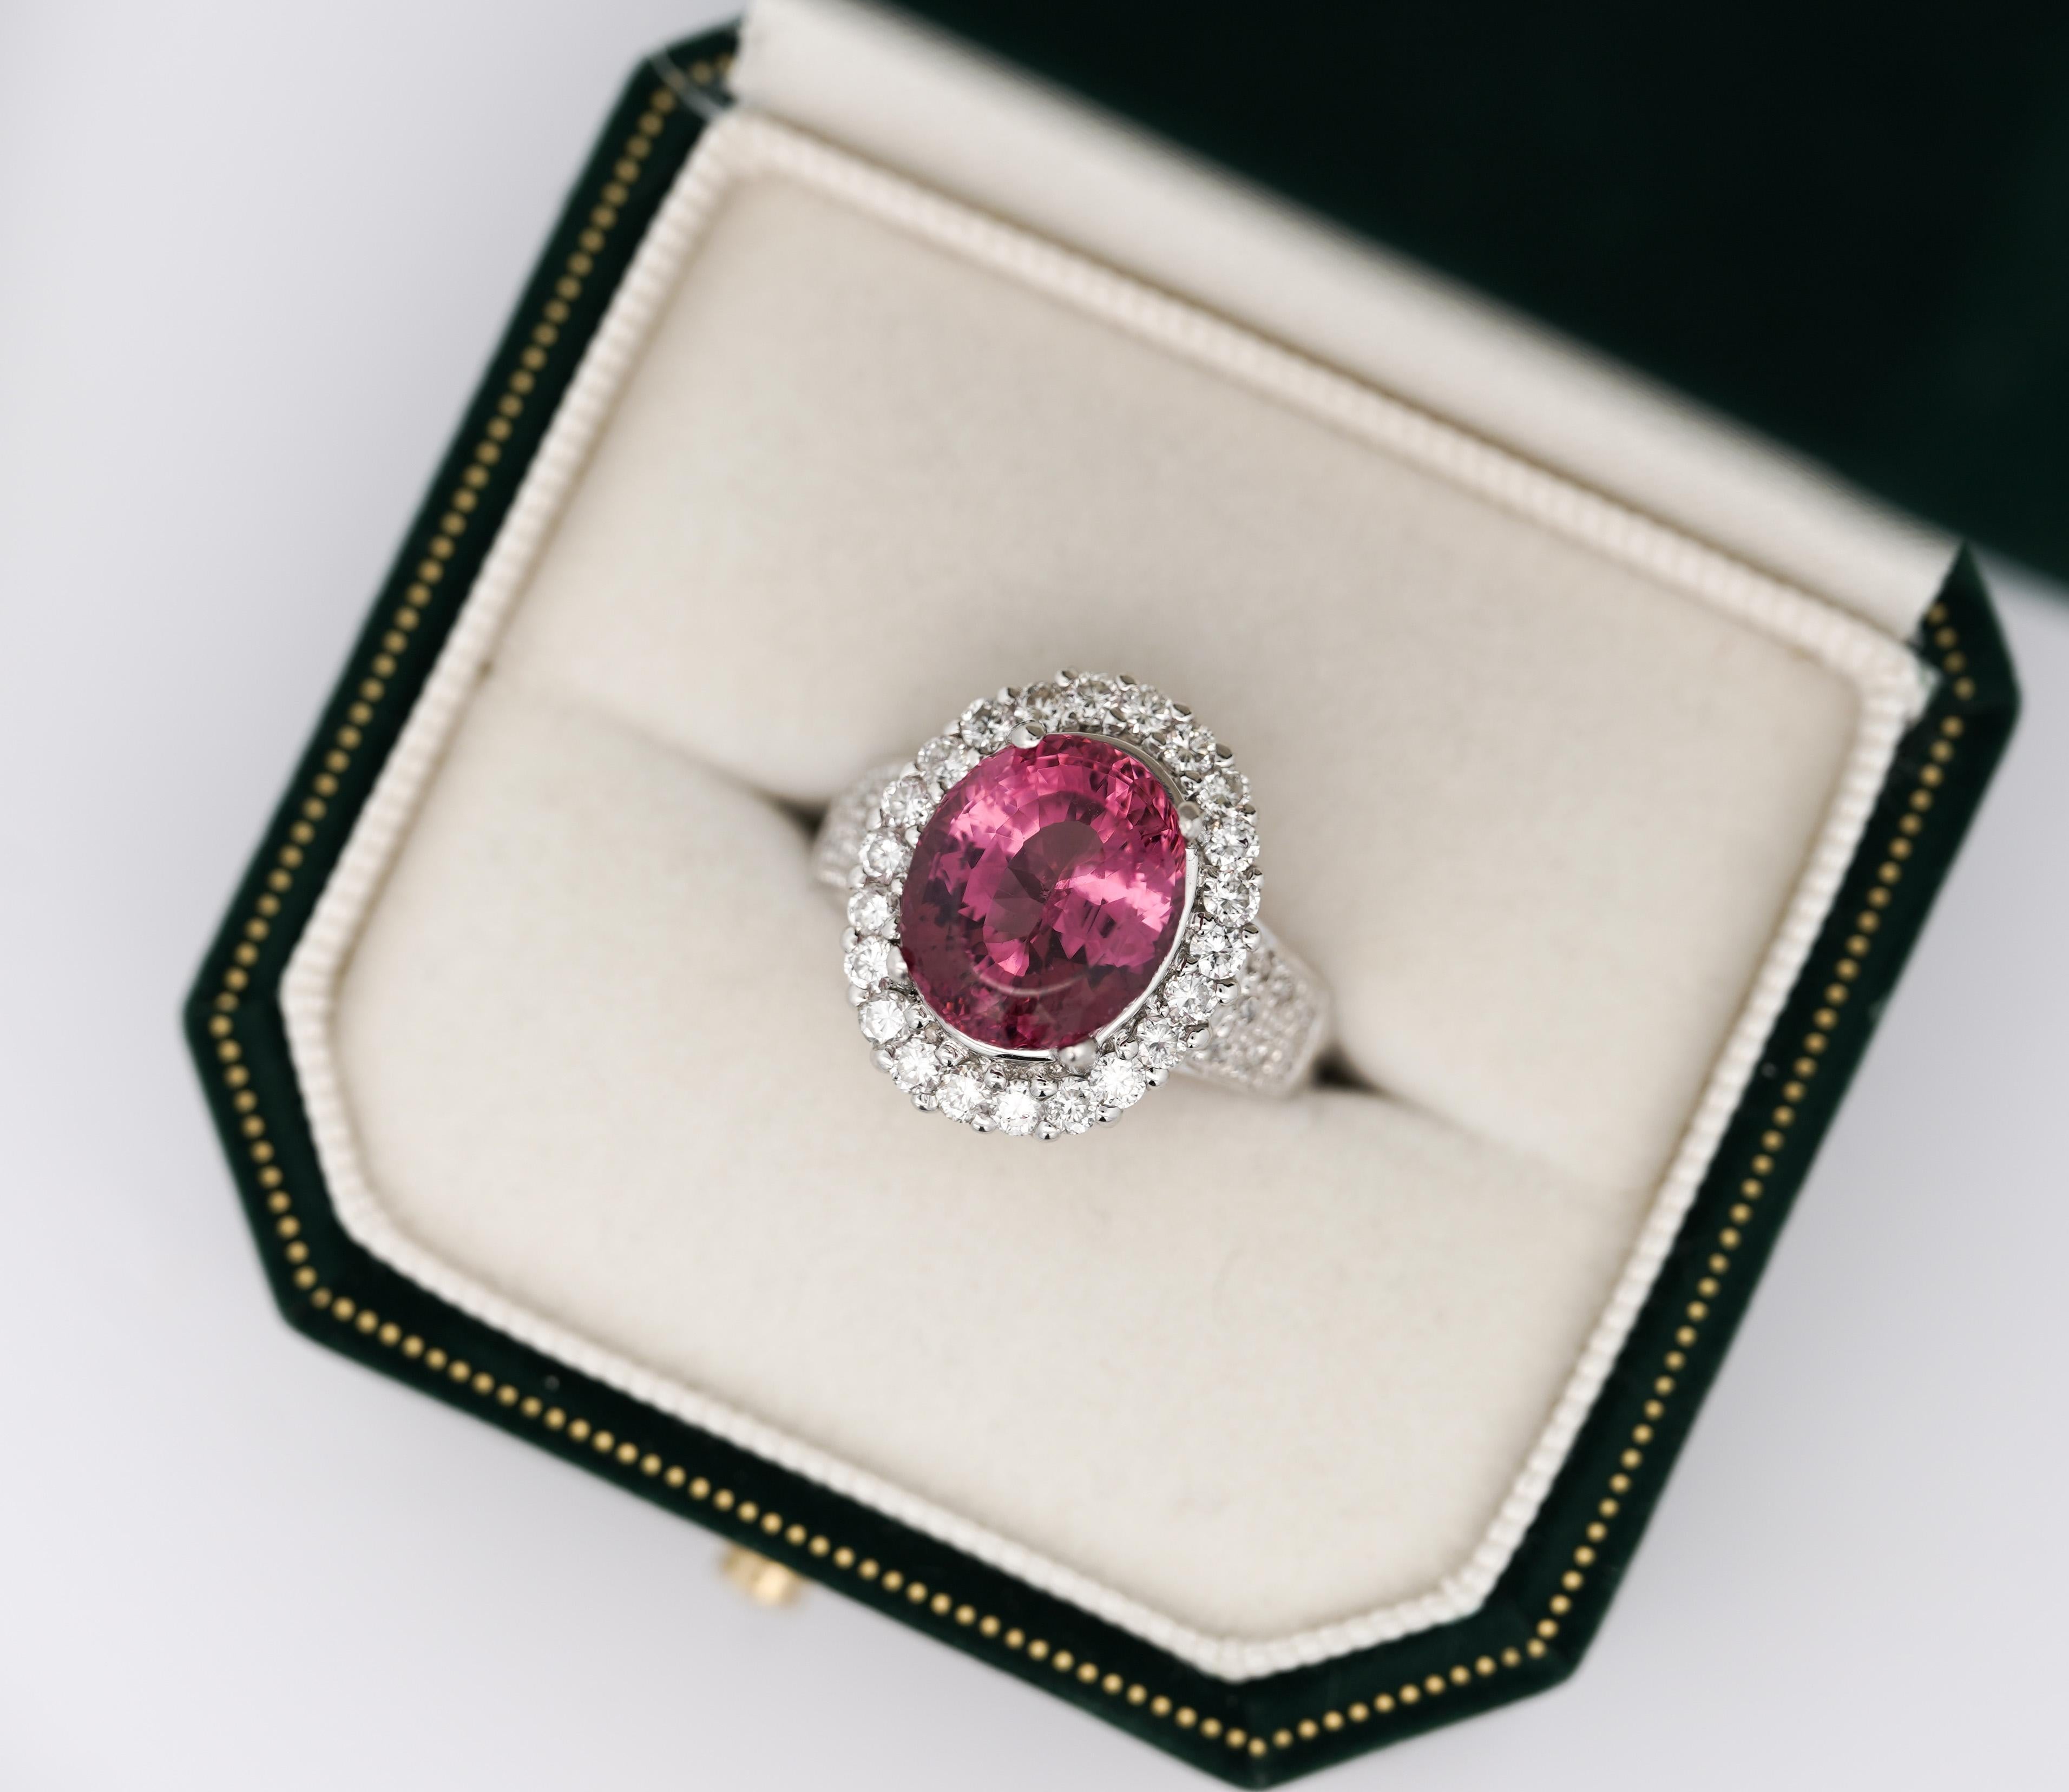 GIA Certified Oval Cut Pink No Heat Spinel and Diamond Ring in Platinum. 

GIA certified spinel center stone. Spinel has a pink hue and weighs 7.60 carats. The Spinel has non heat treatment and bears superb color, luster, and clarity. The center